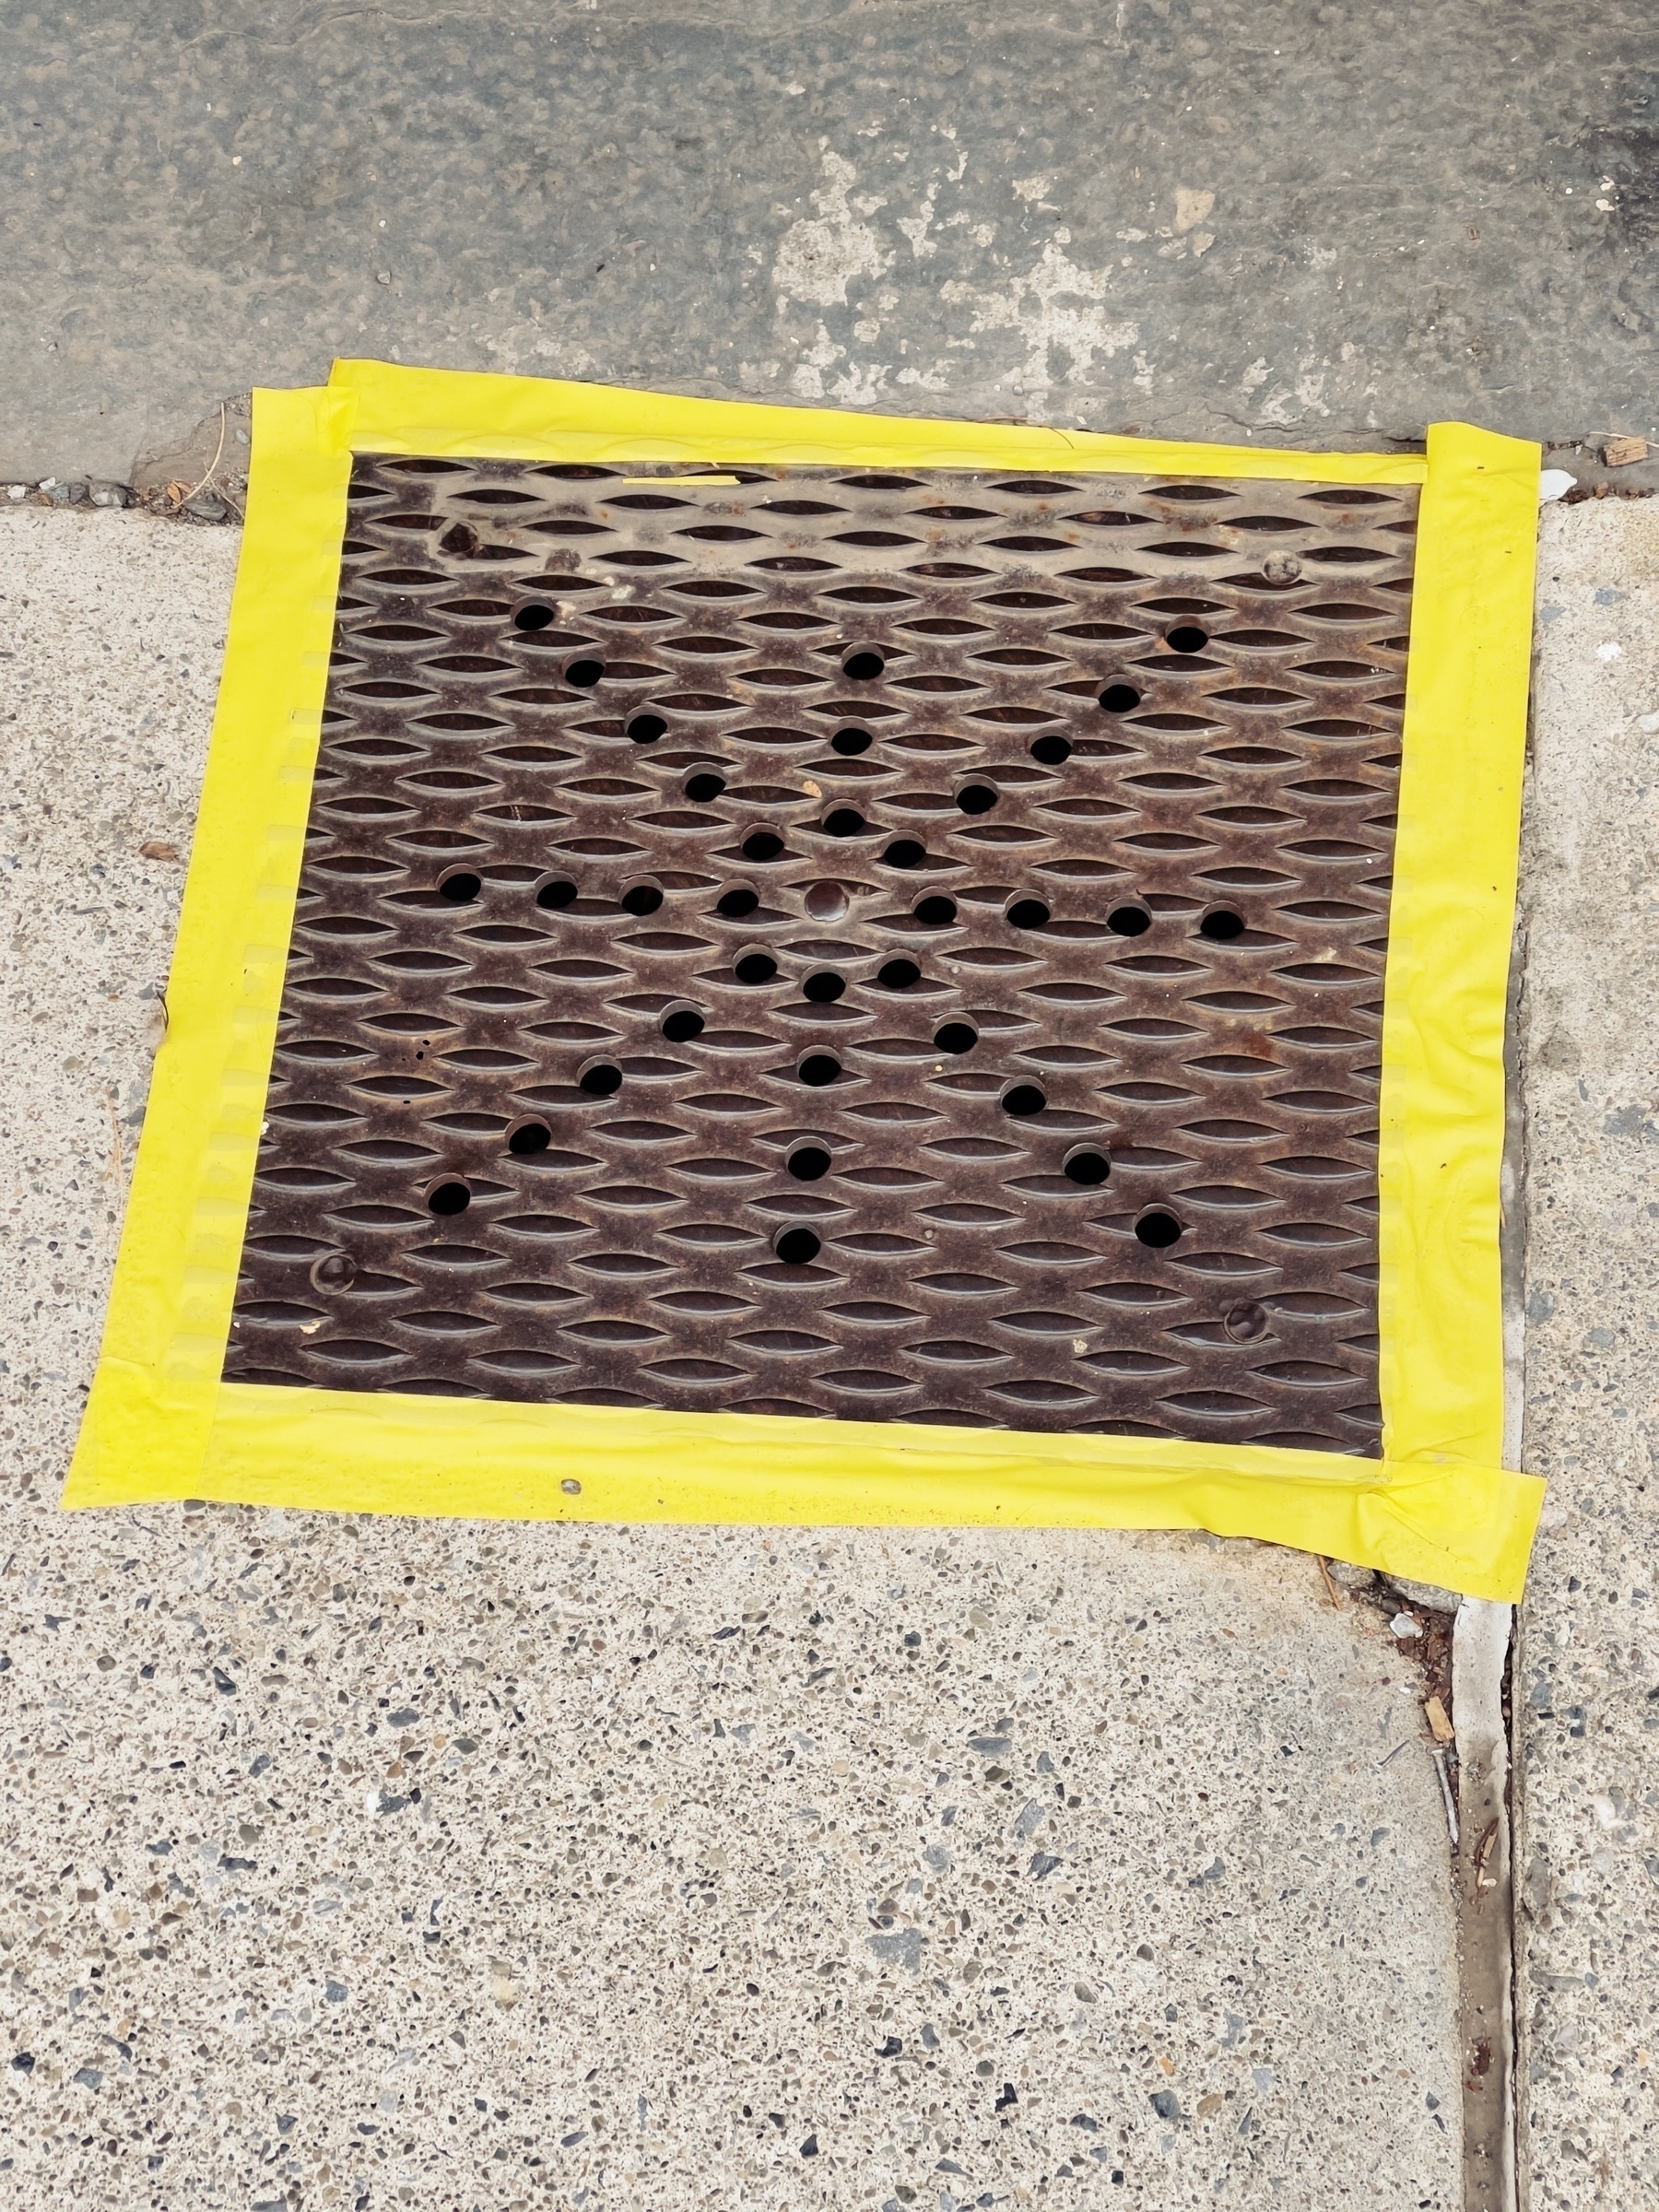 Yellow caution tape around utility access steel plate.